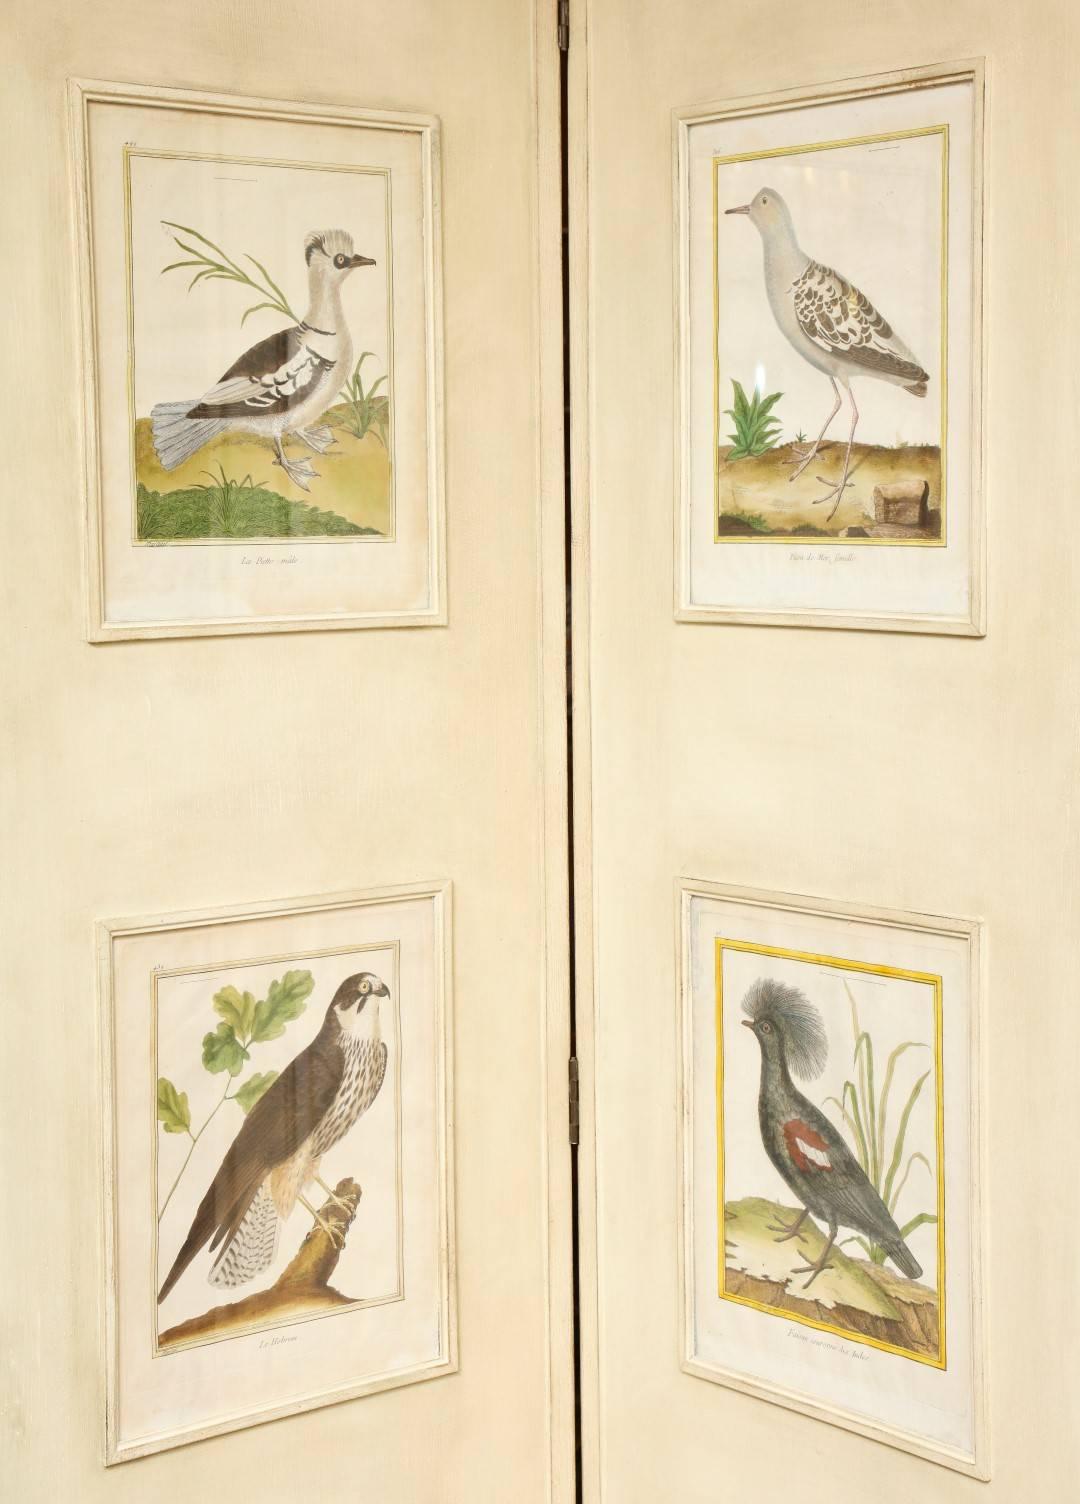 A French 19th century four-panel painted wood screen, each panel inset with various 18th century ornithological watercolor plates with accompanying French inscription of the species of bird, to the bottom of the plate, the screen with reverse hinges.